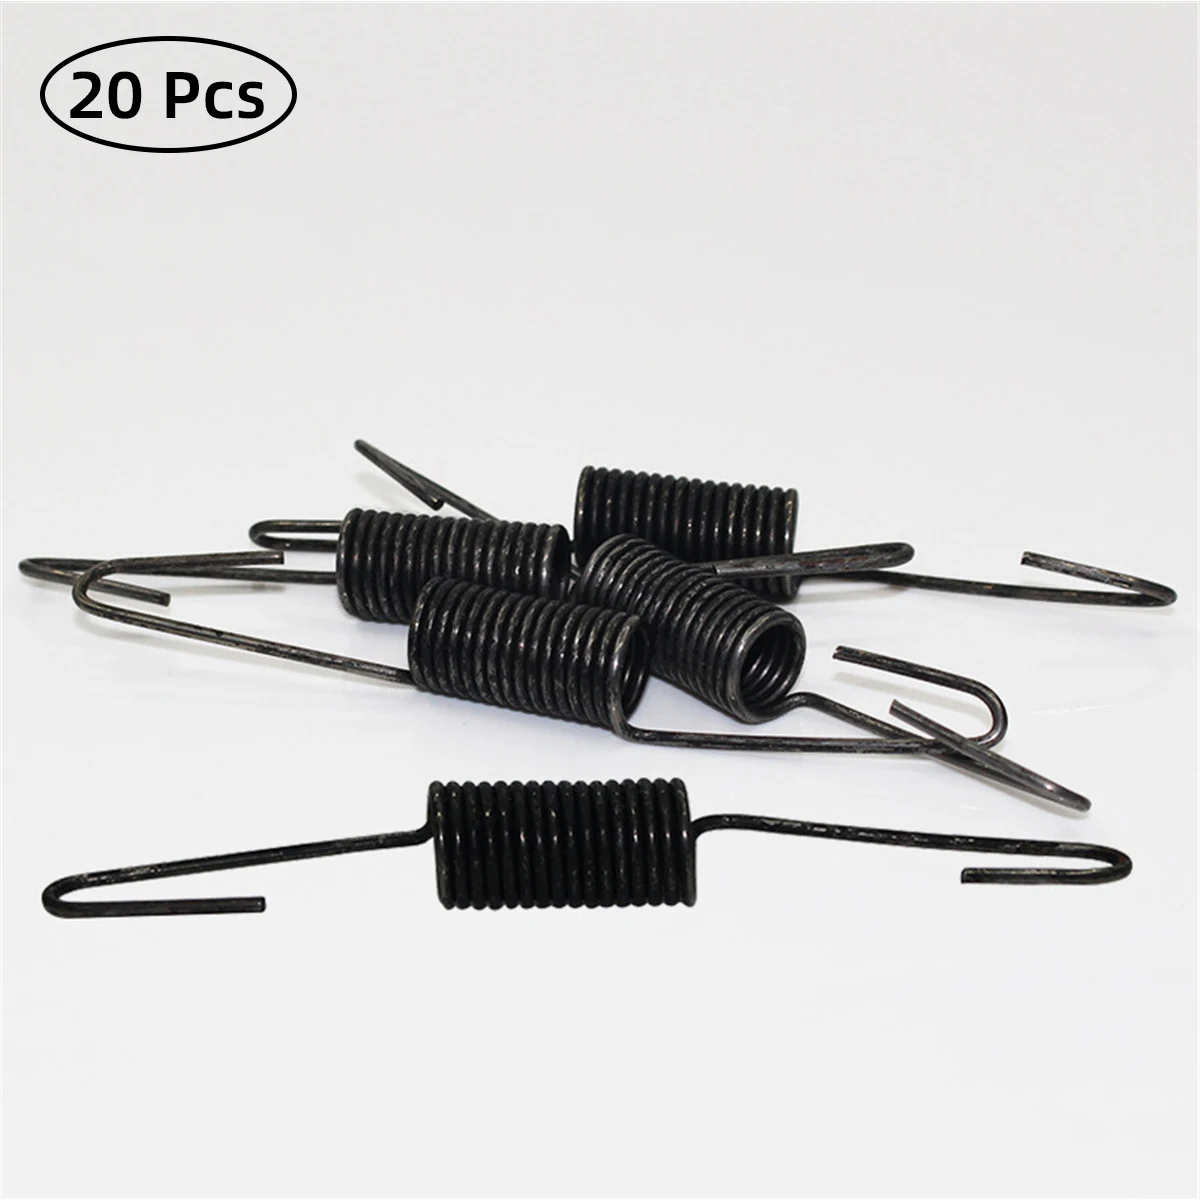 20 Pcs Sofa Furniture Replacement Springs Extension Balance Hooks Household Hardware Chair Recliner Bed Parts Repair Accessories